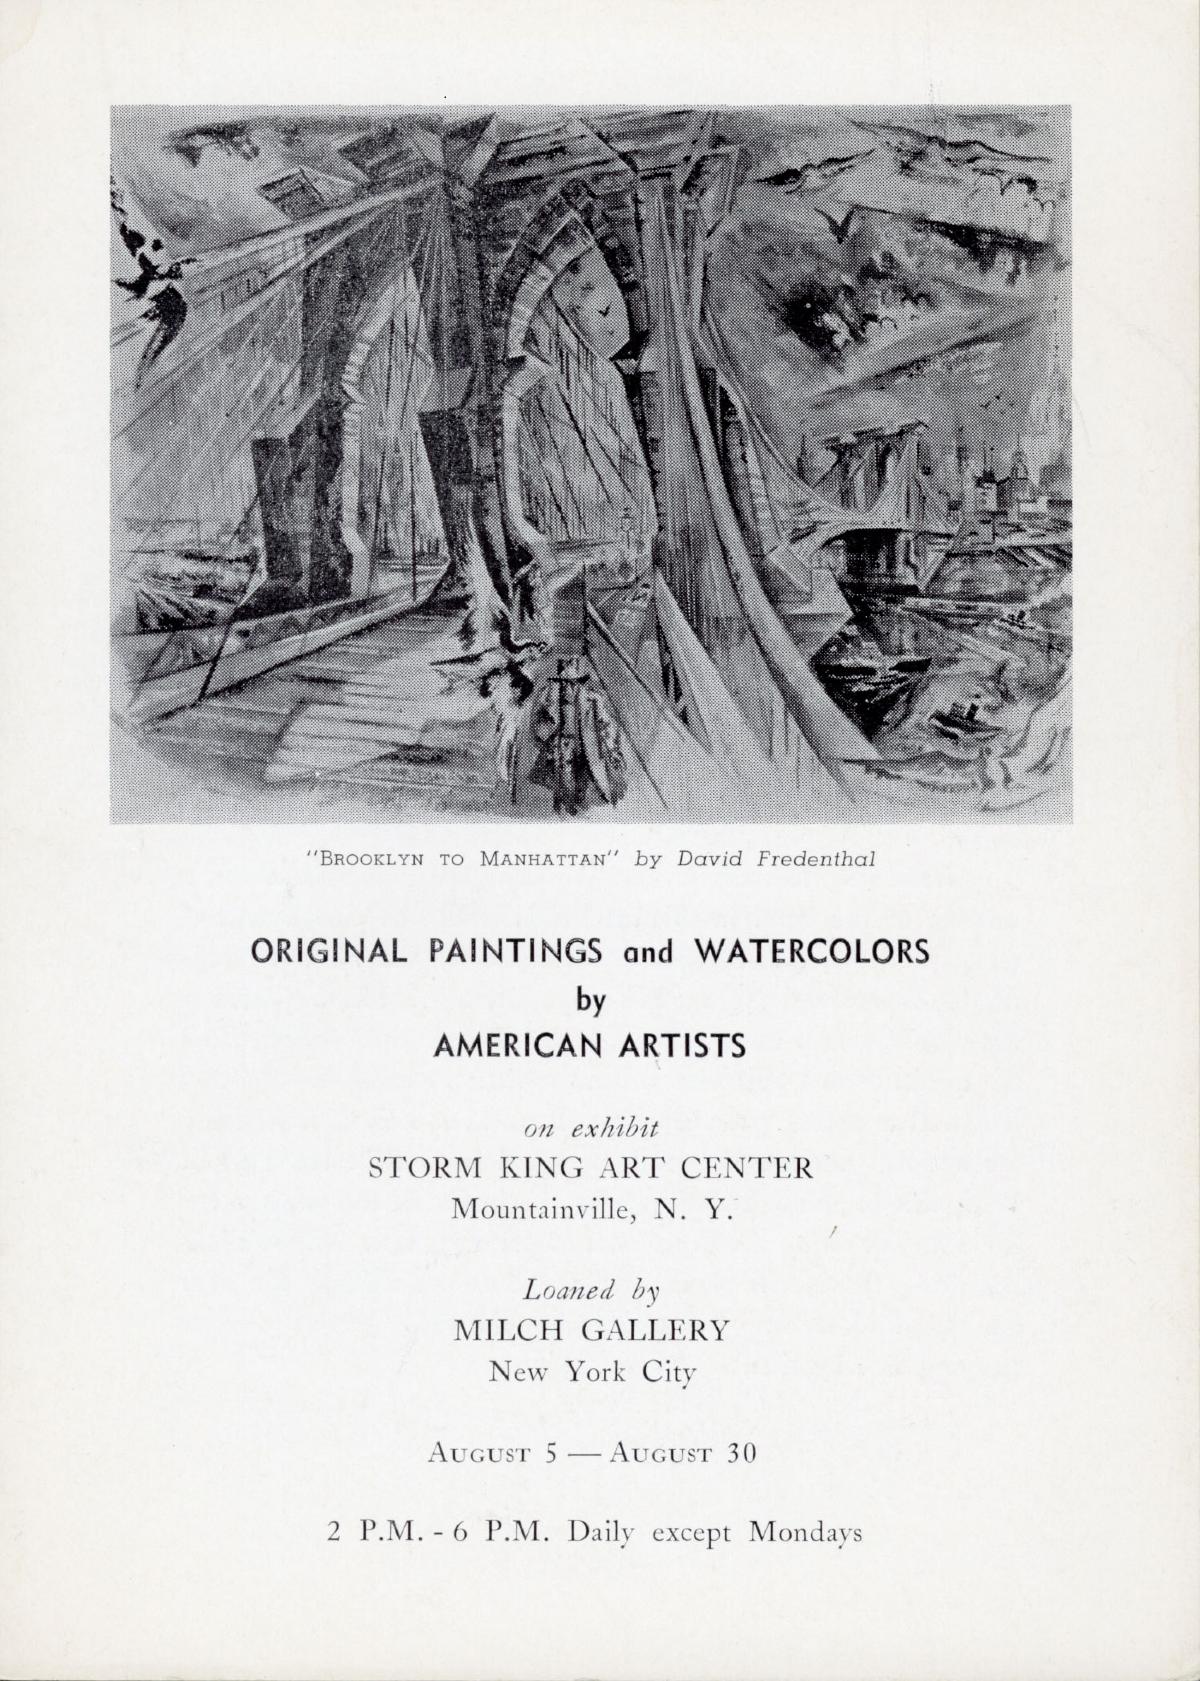 Original Paintings and Watercolors by American Artists, August 5-30, 1962, catalogue cover